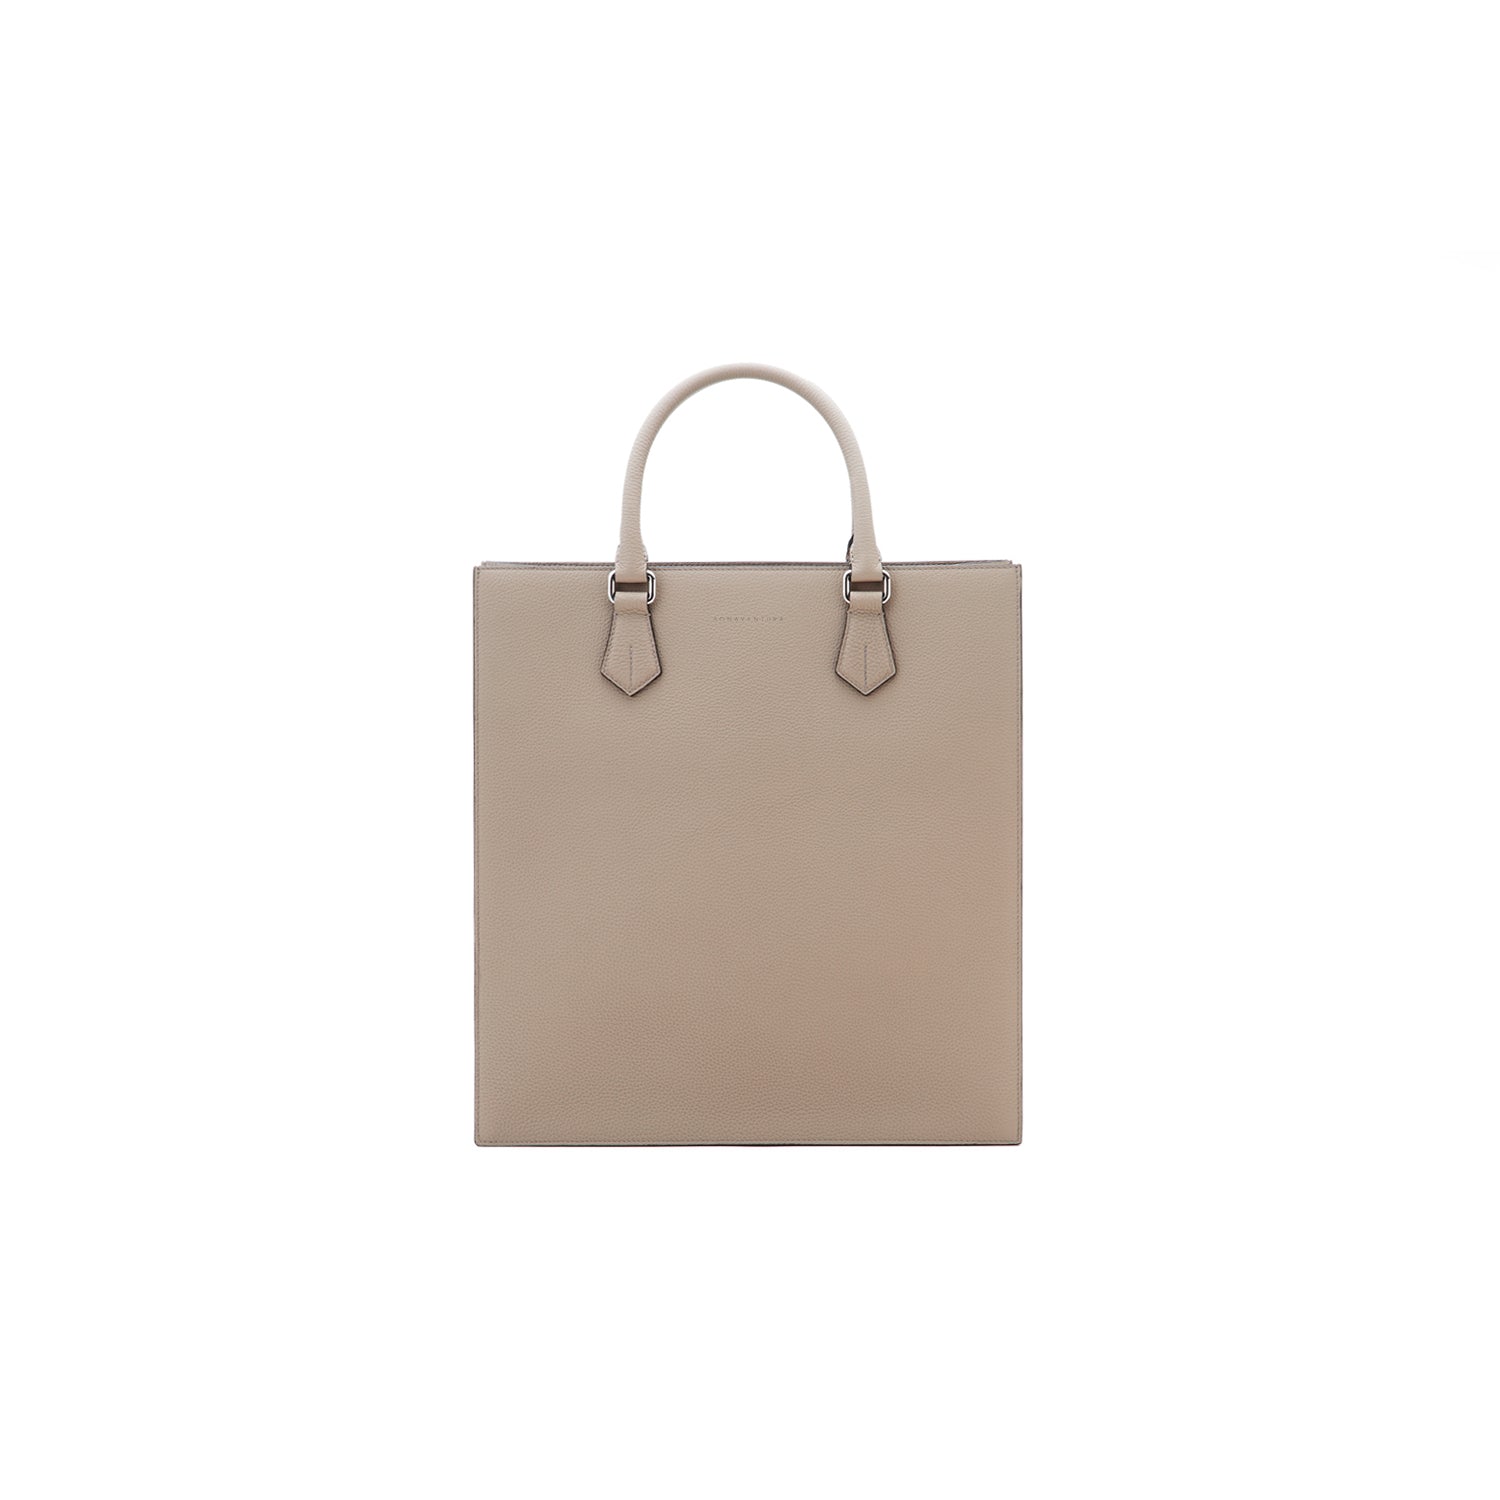 Marco Tote Bag in Shrink Leather